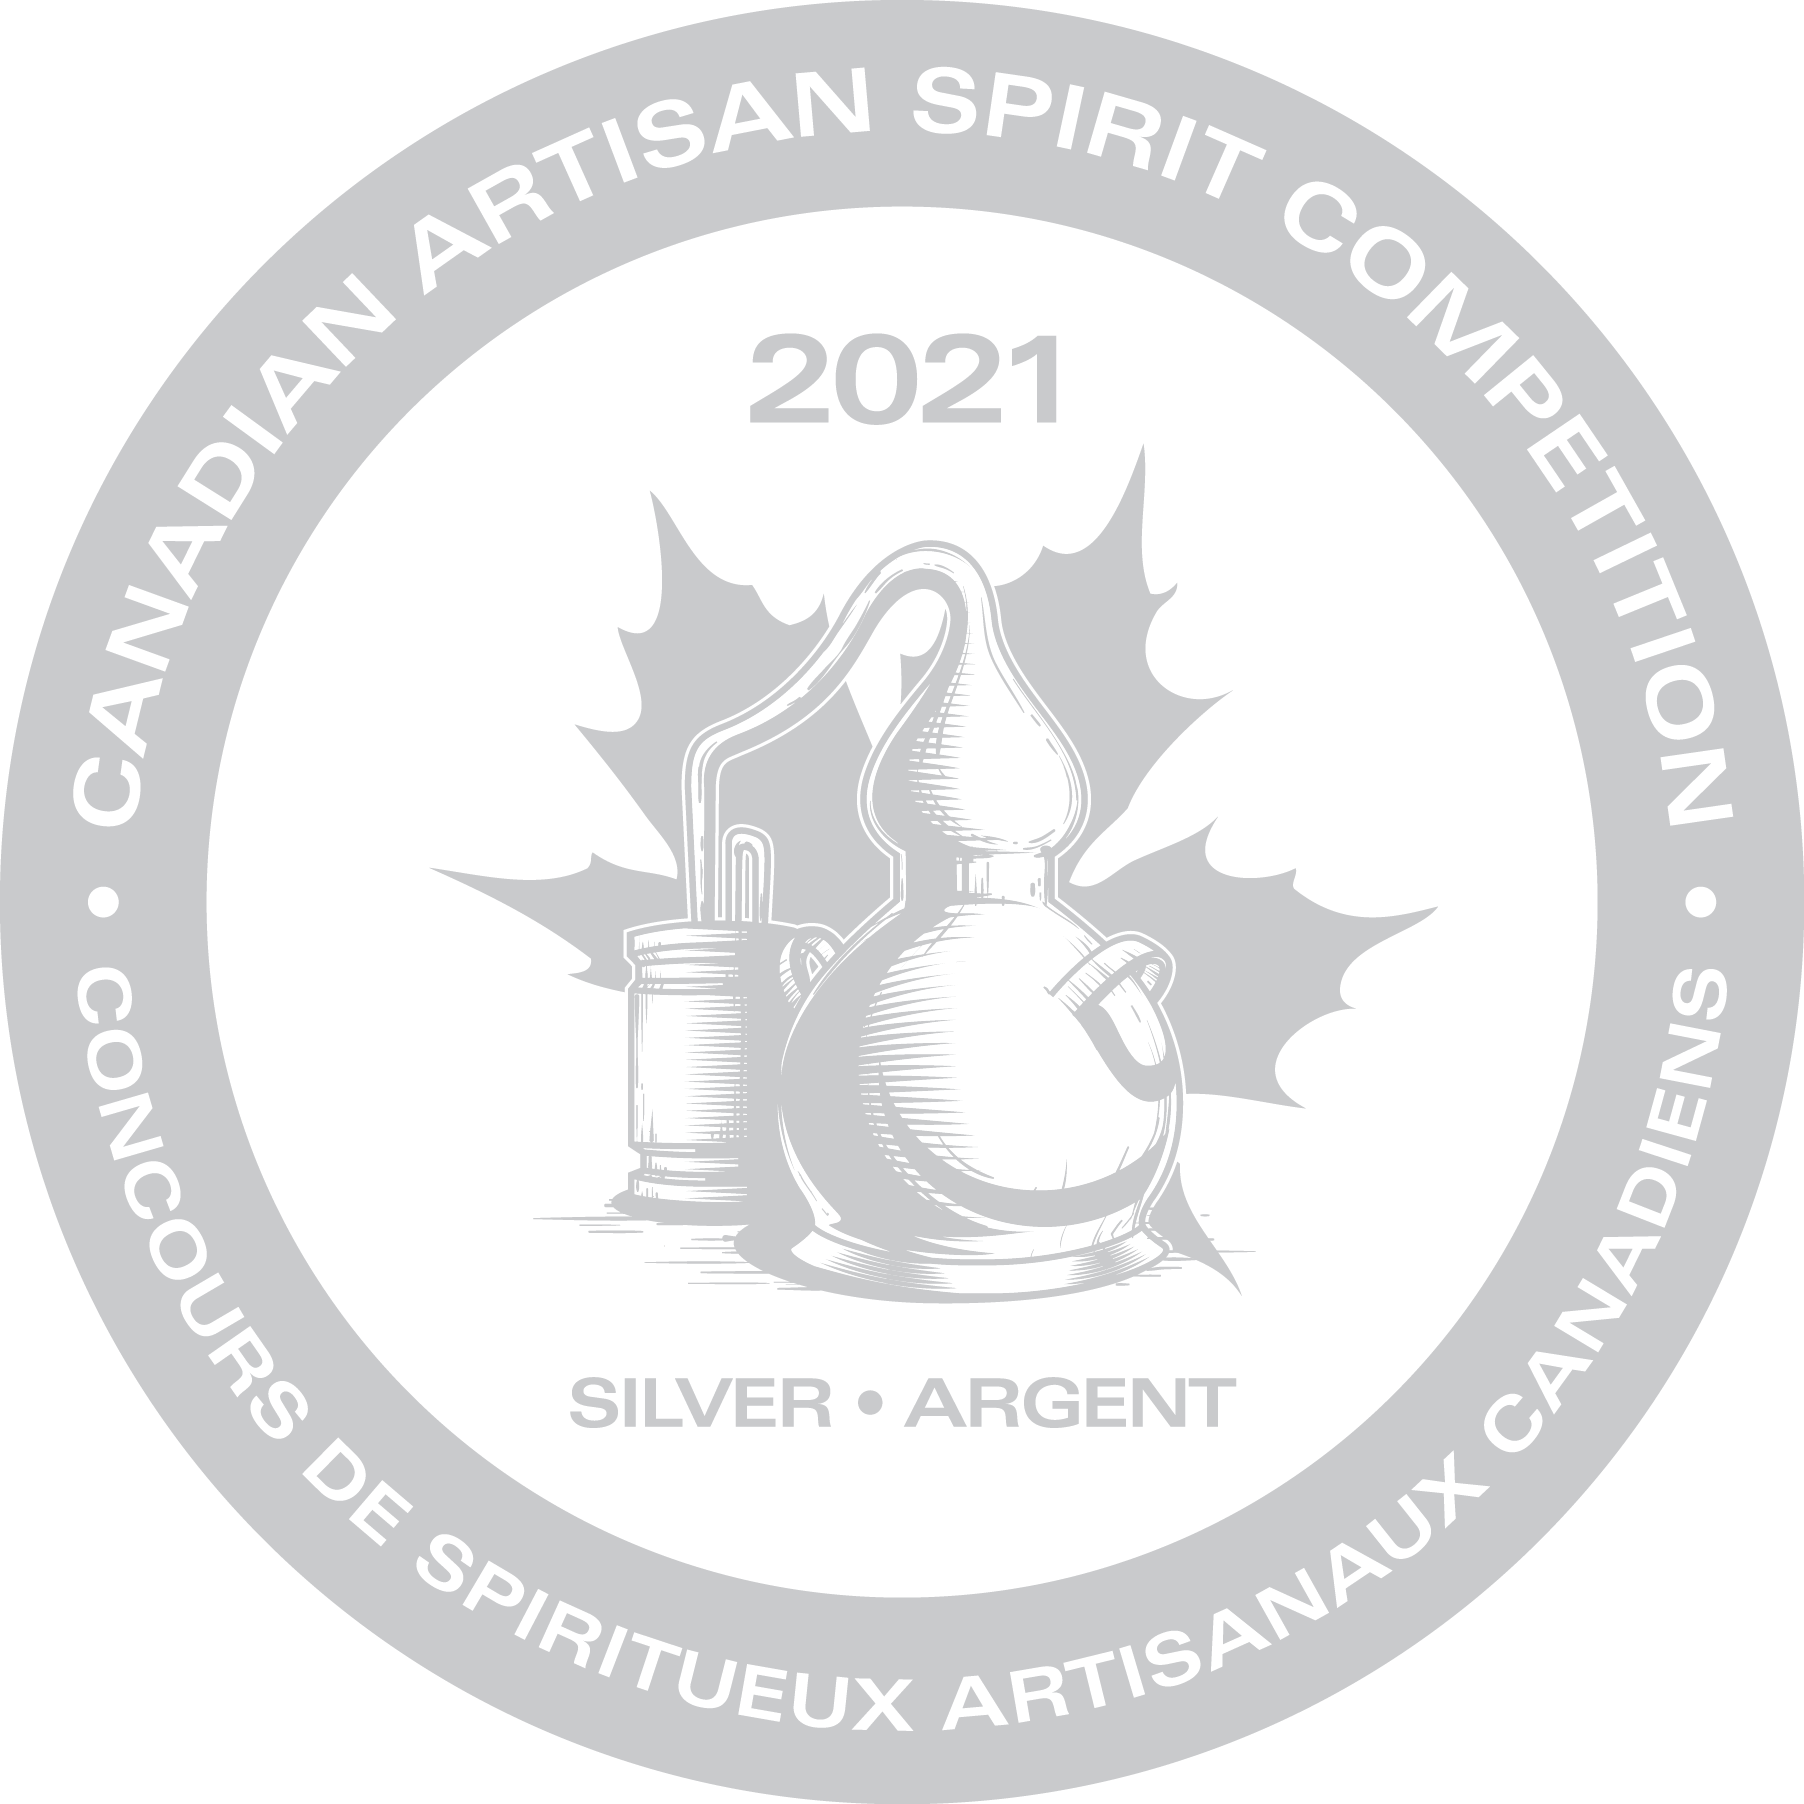 Canadian Artisan Spirit Competition 2021, Silver